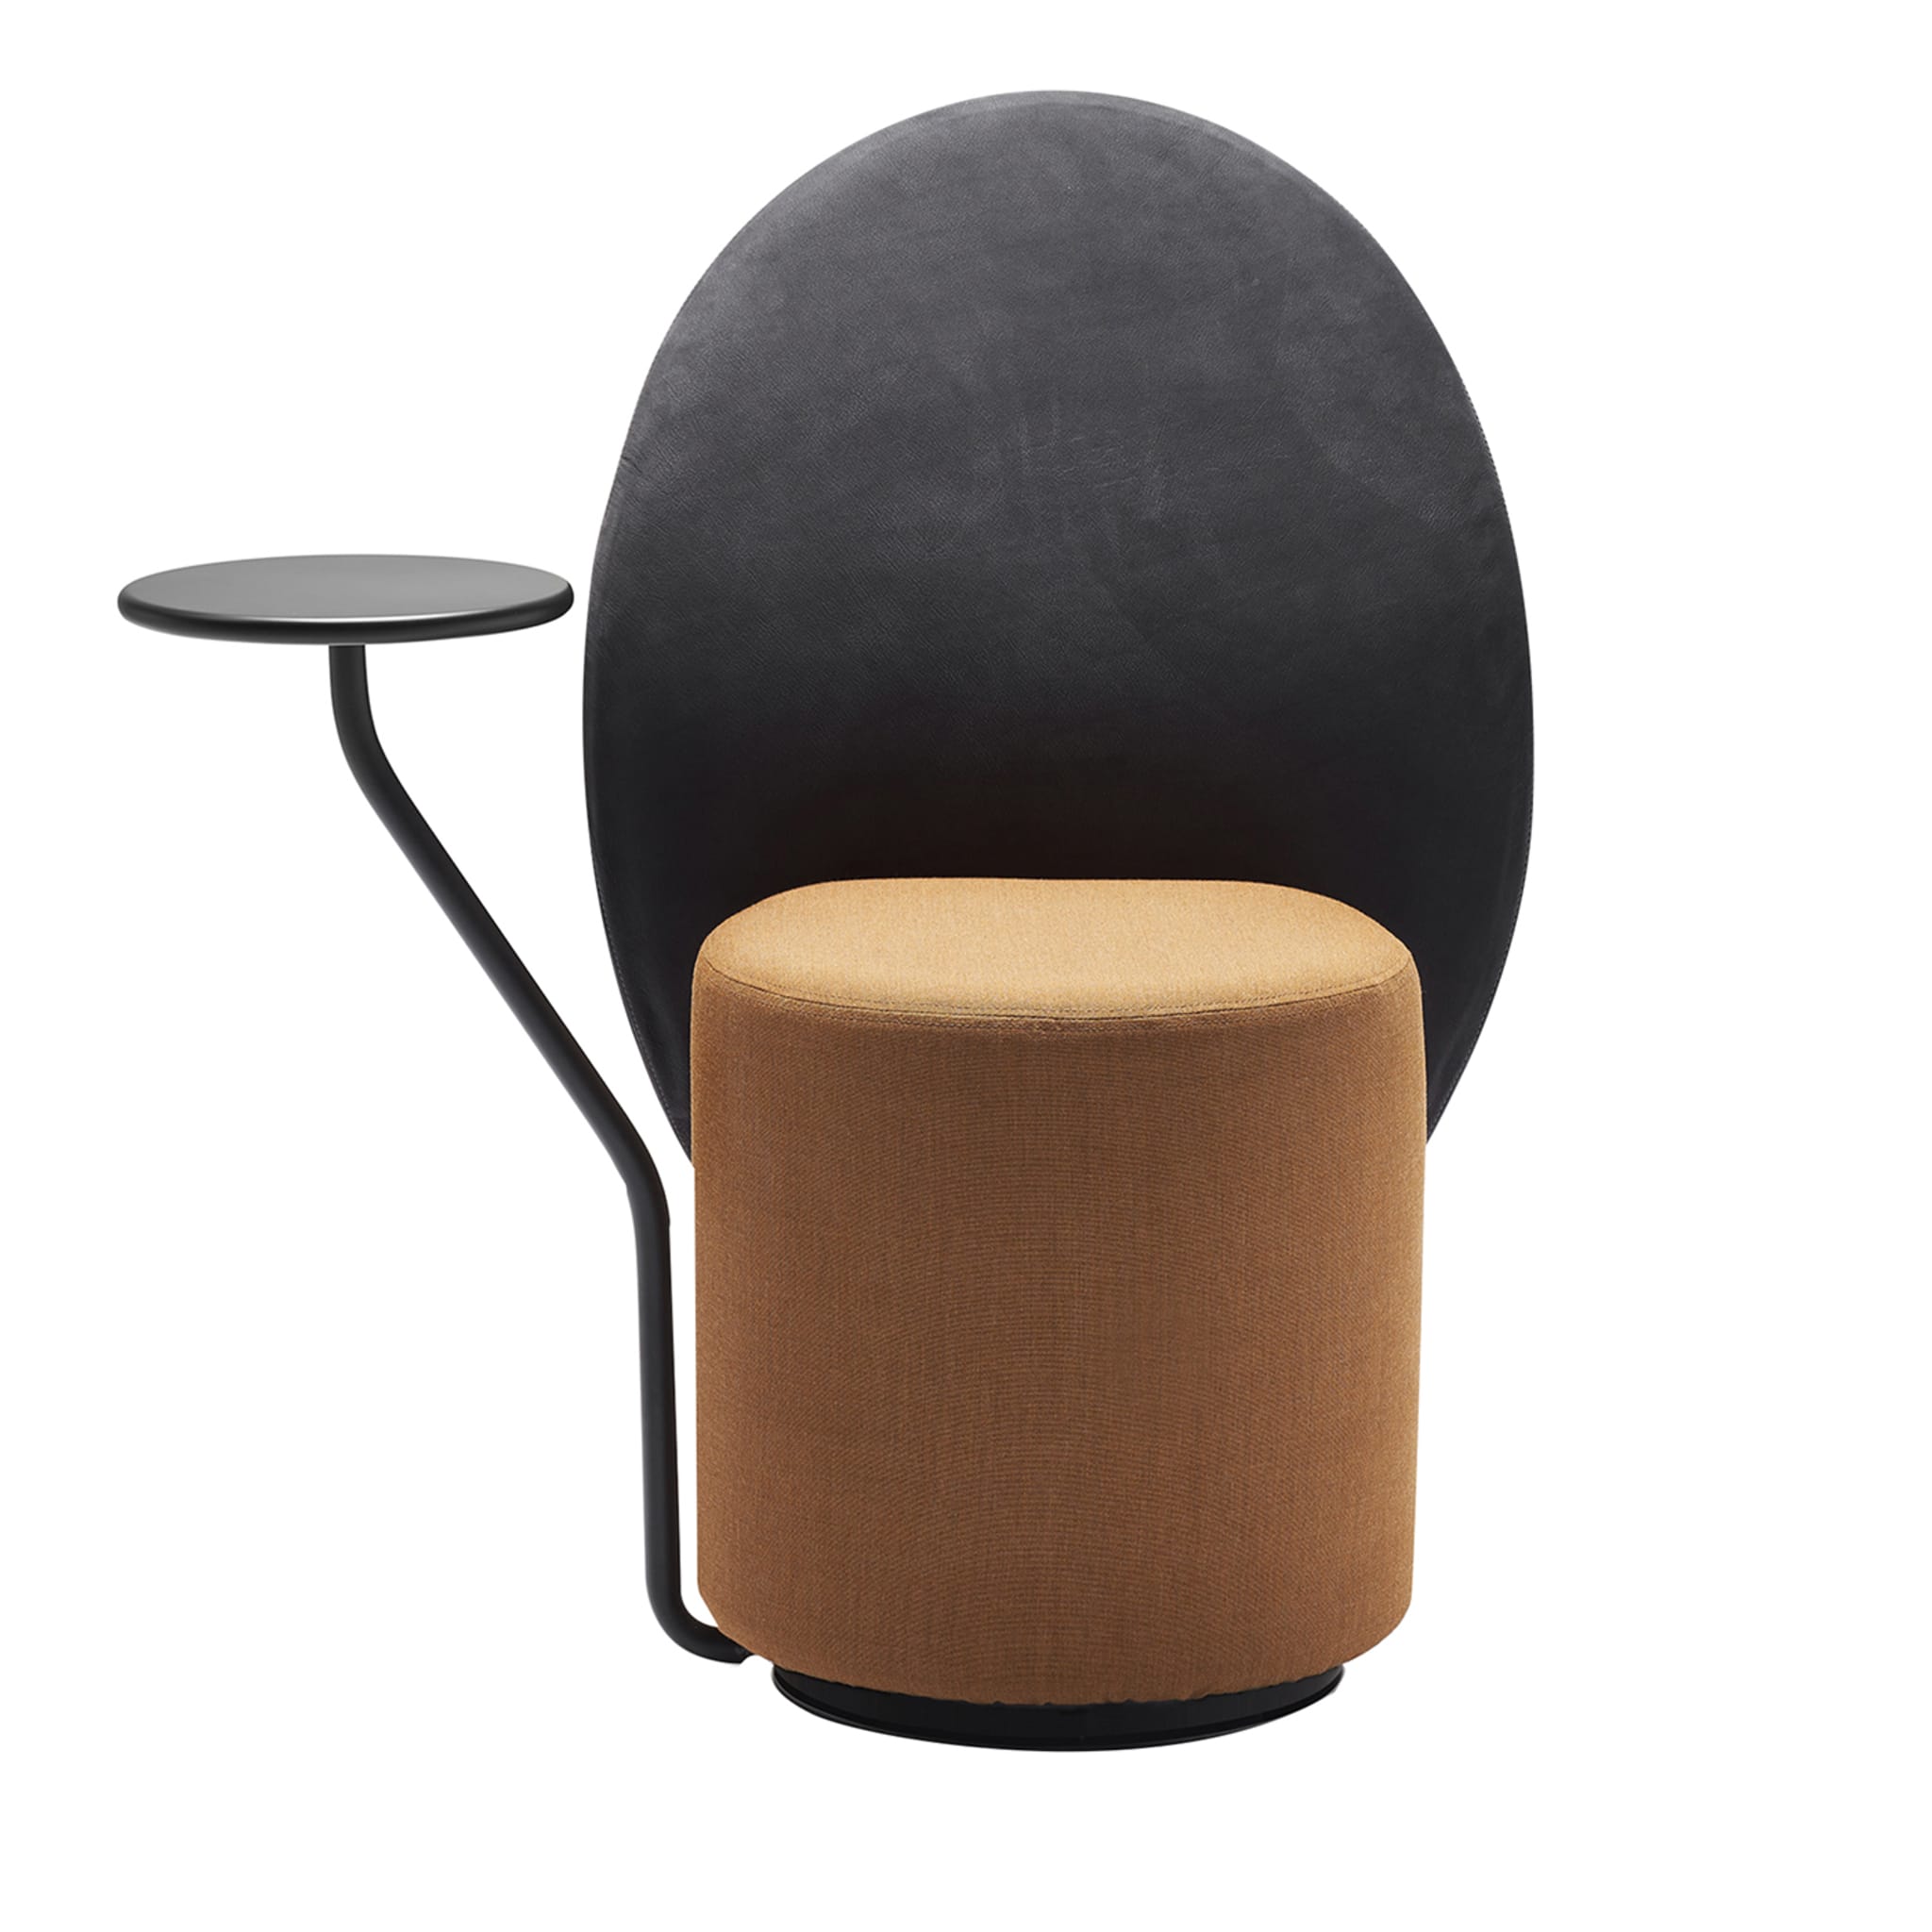 Loomi Black and Mustard Chair with Top by Lapo Ciatti - Main view